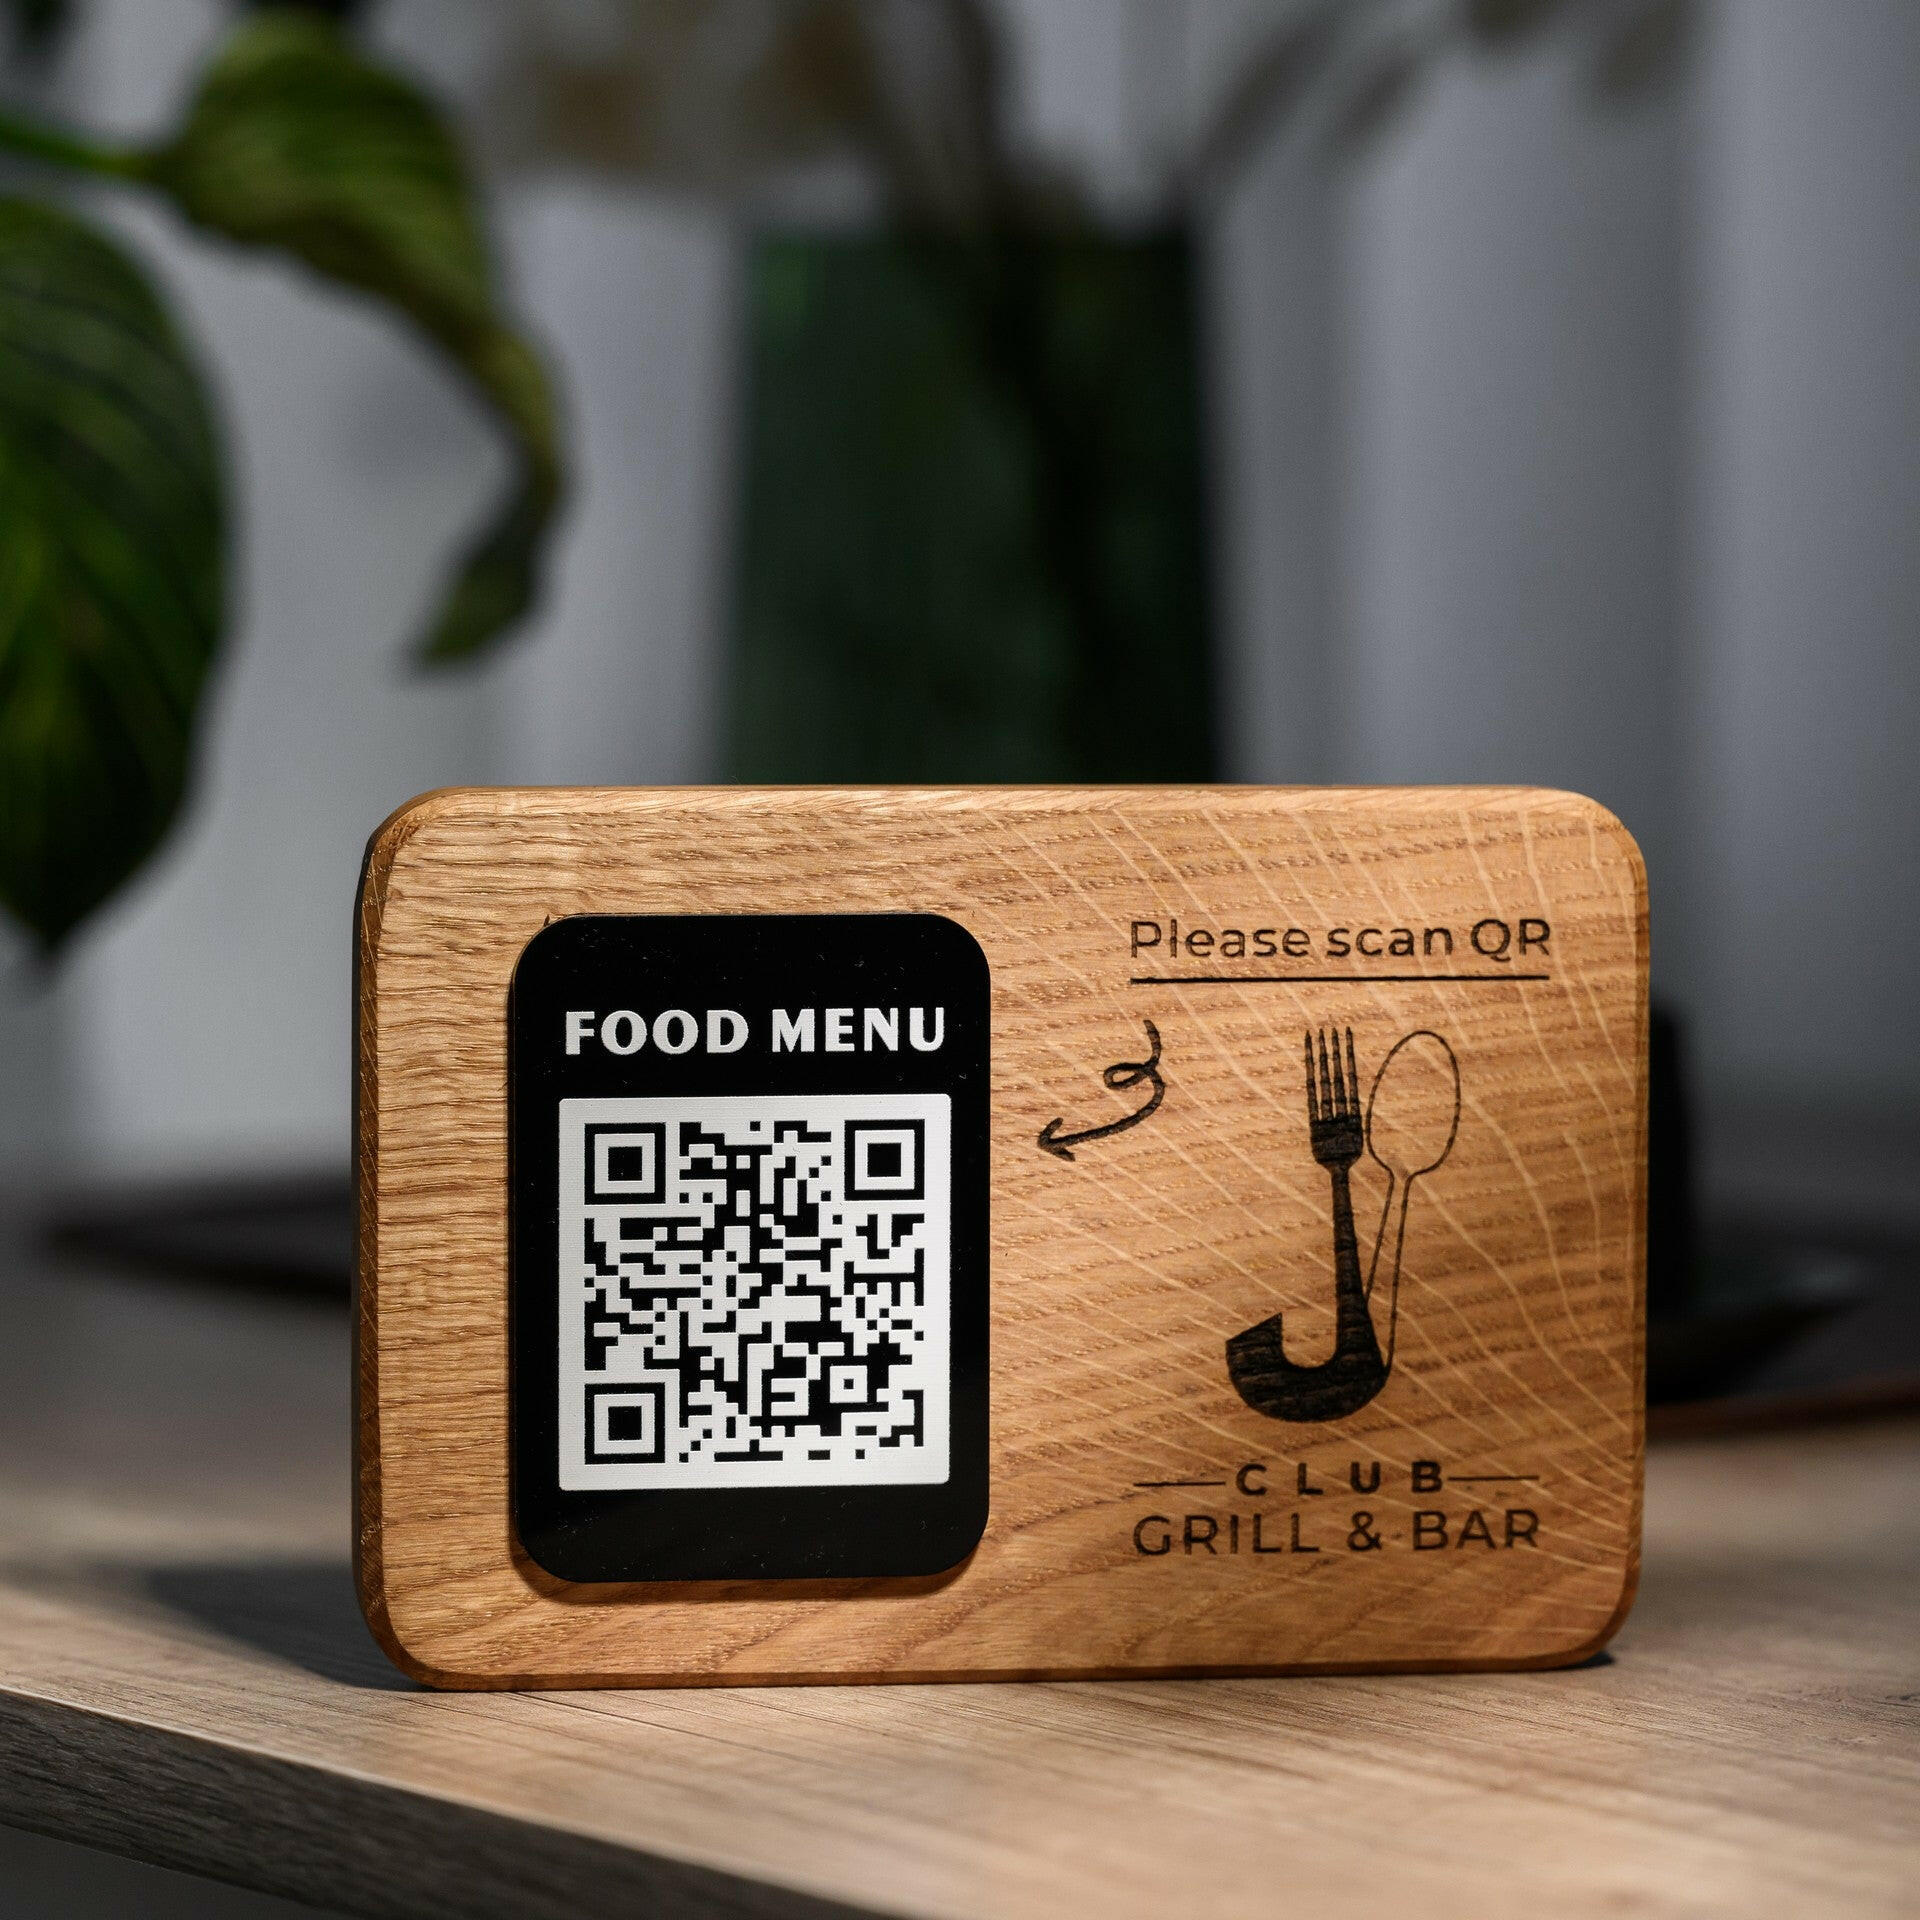 Elegant wooden plate with a touchless menu QR code, perfect for restaurants and cafes offering contactless service.